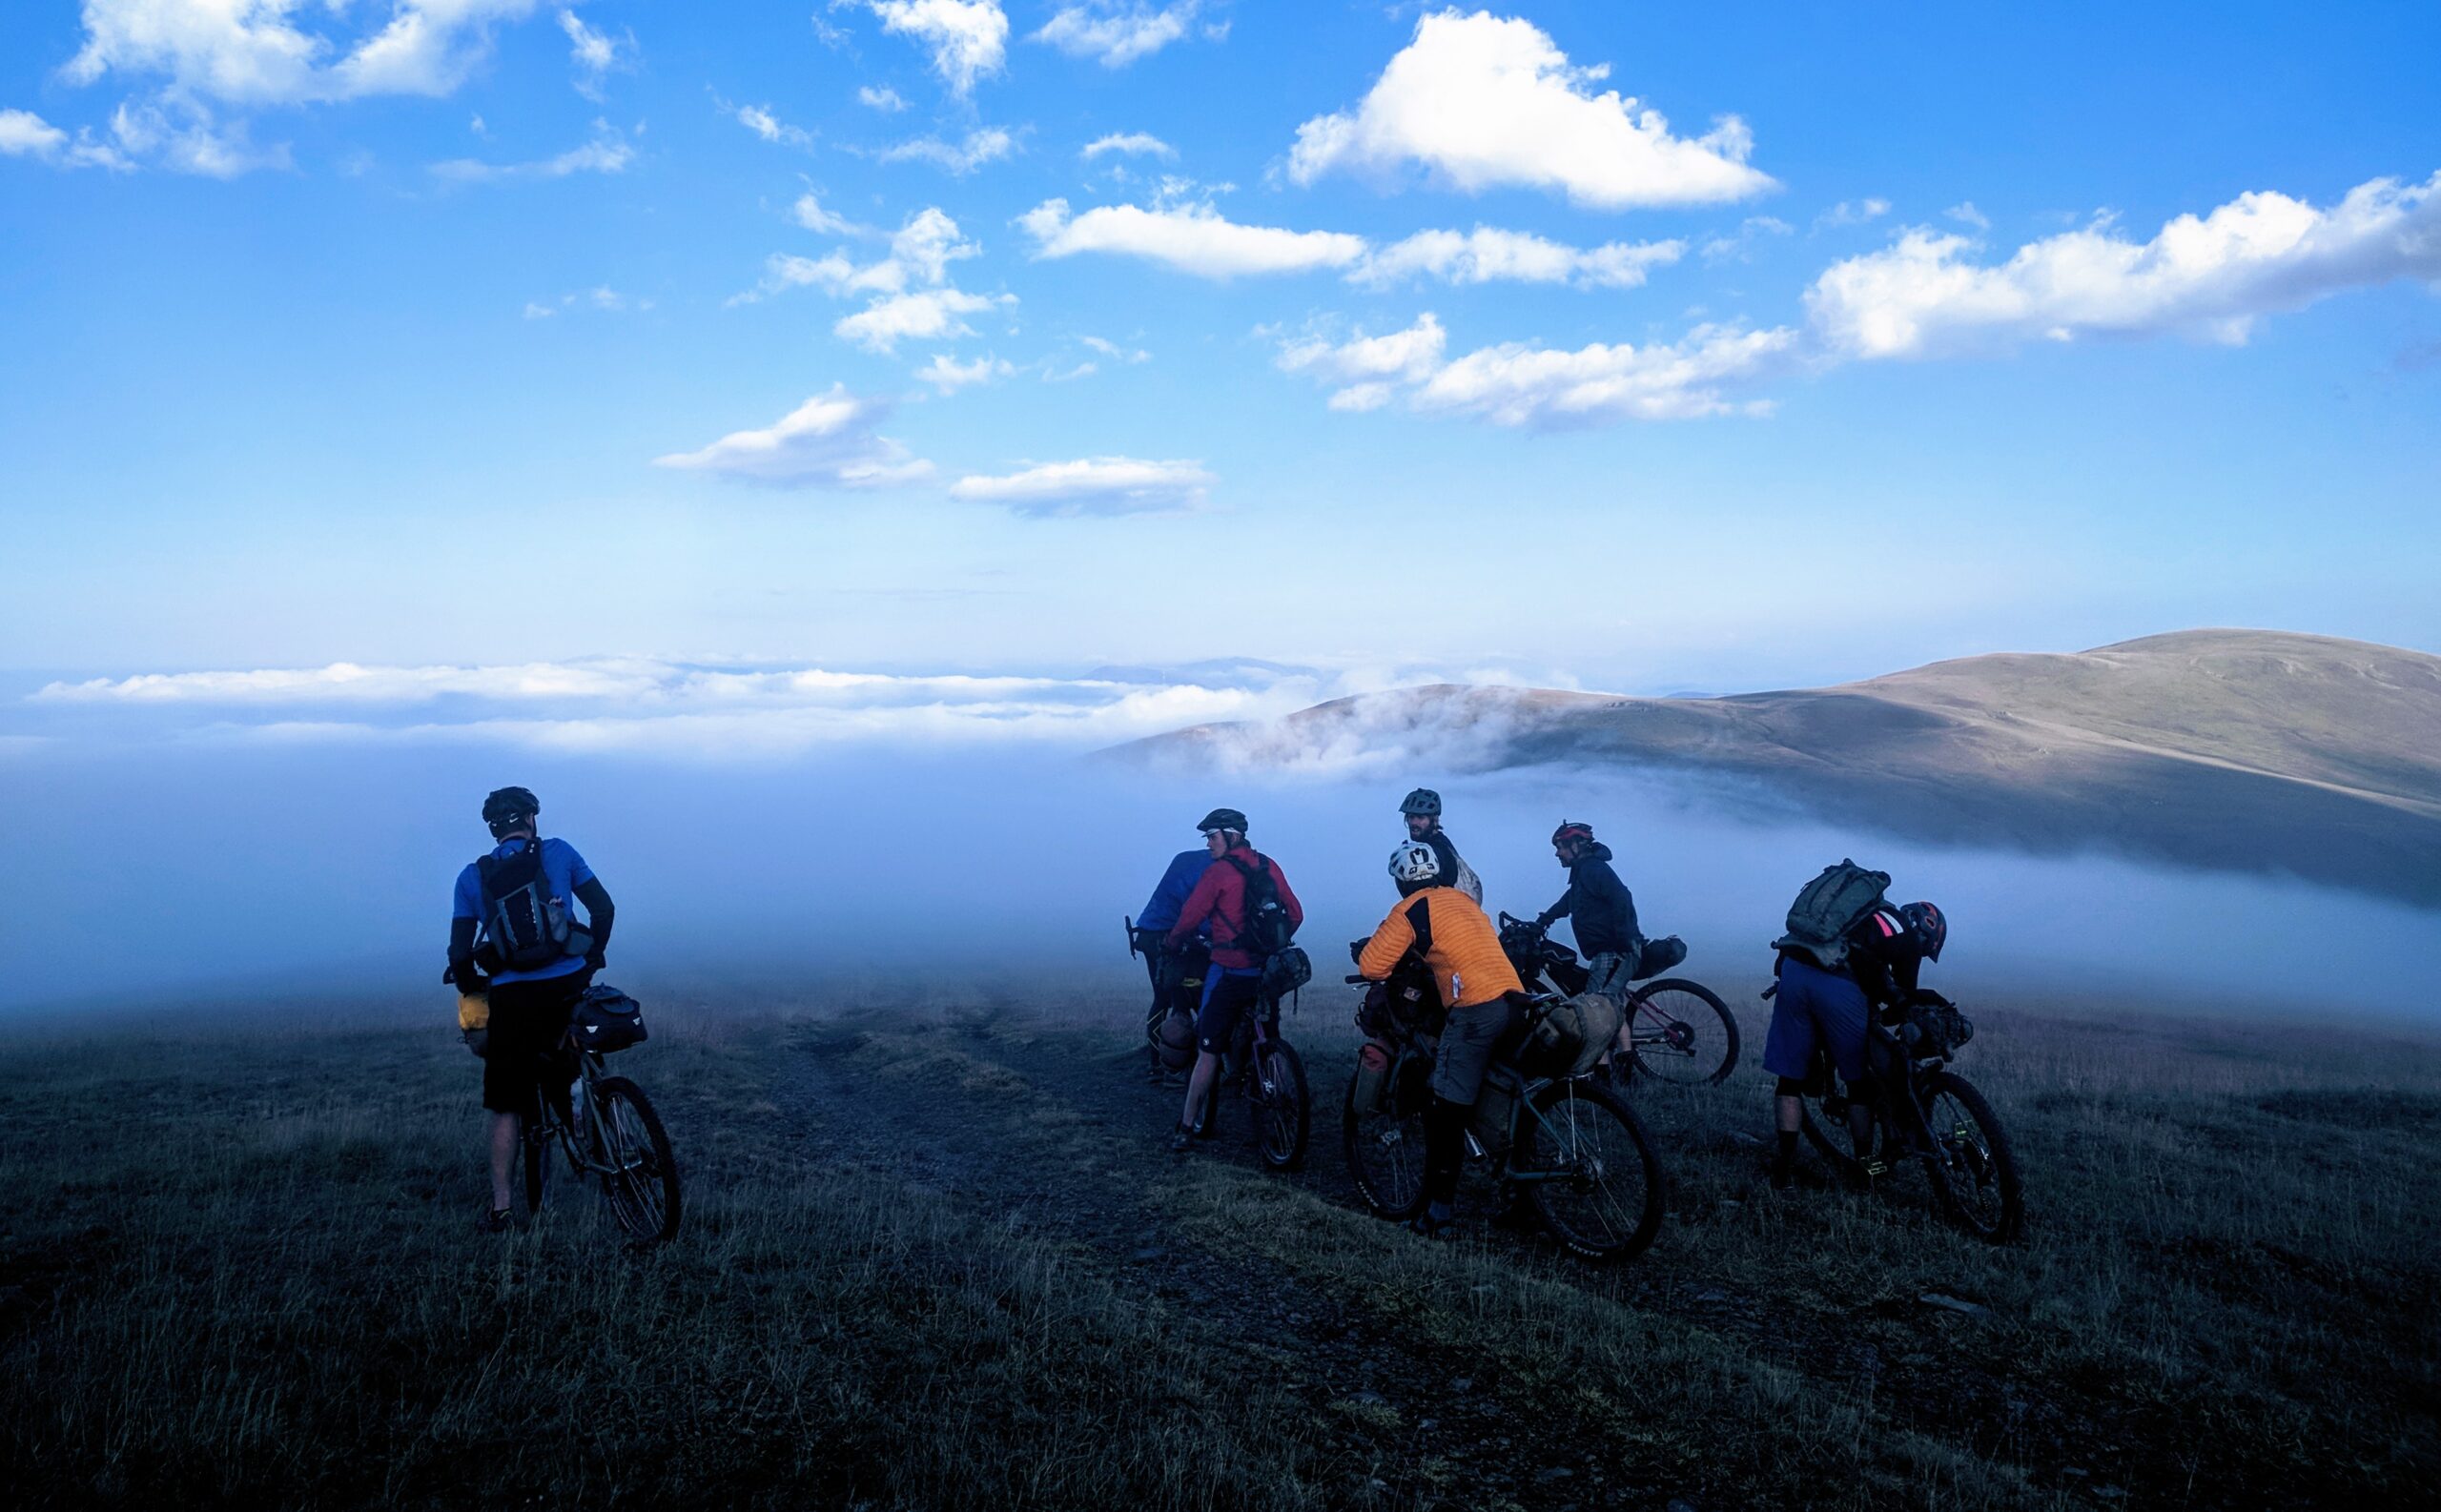 The Bikepacking Armenia 2018 team overlooking a temperature inversion high in the mountains of Armenia